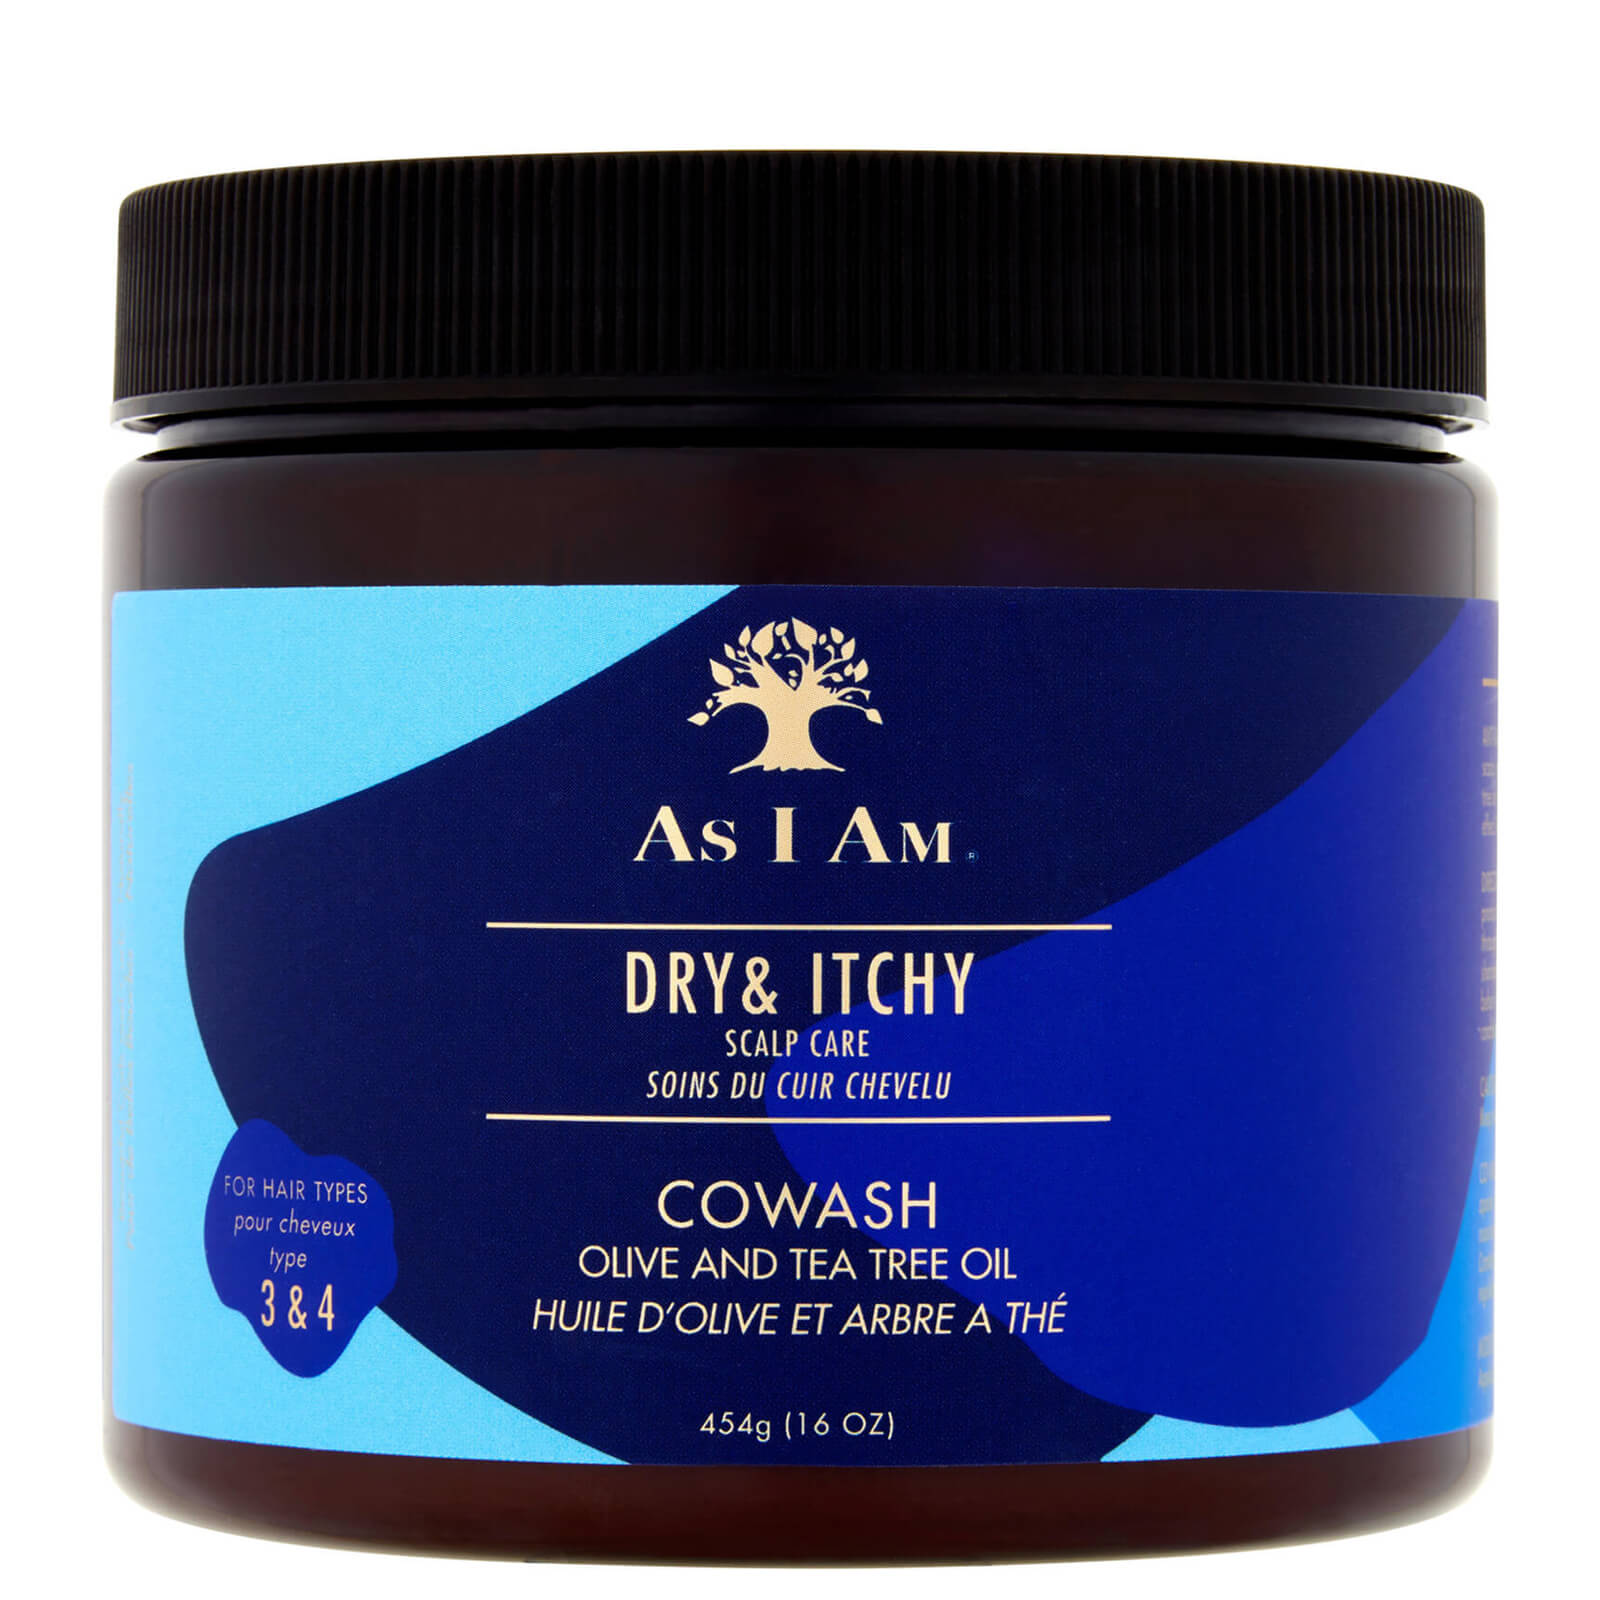 Image of As I Am Dry and Itchy Scalp Care Olive and Tea Tree Oil Co-Wash 454g